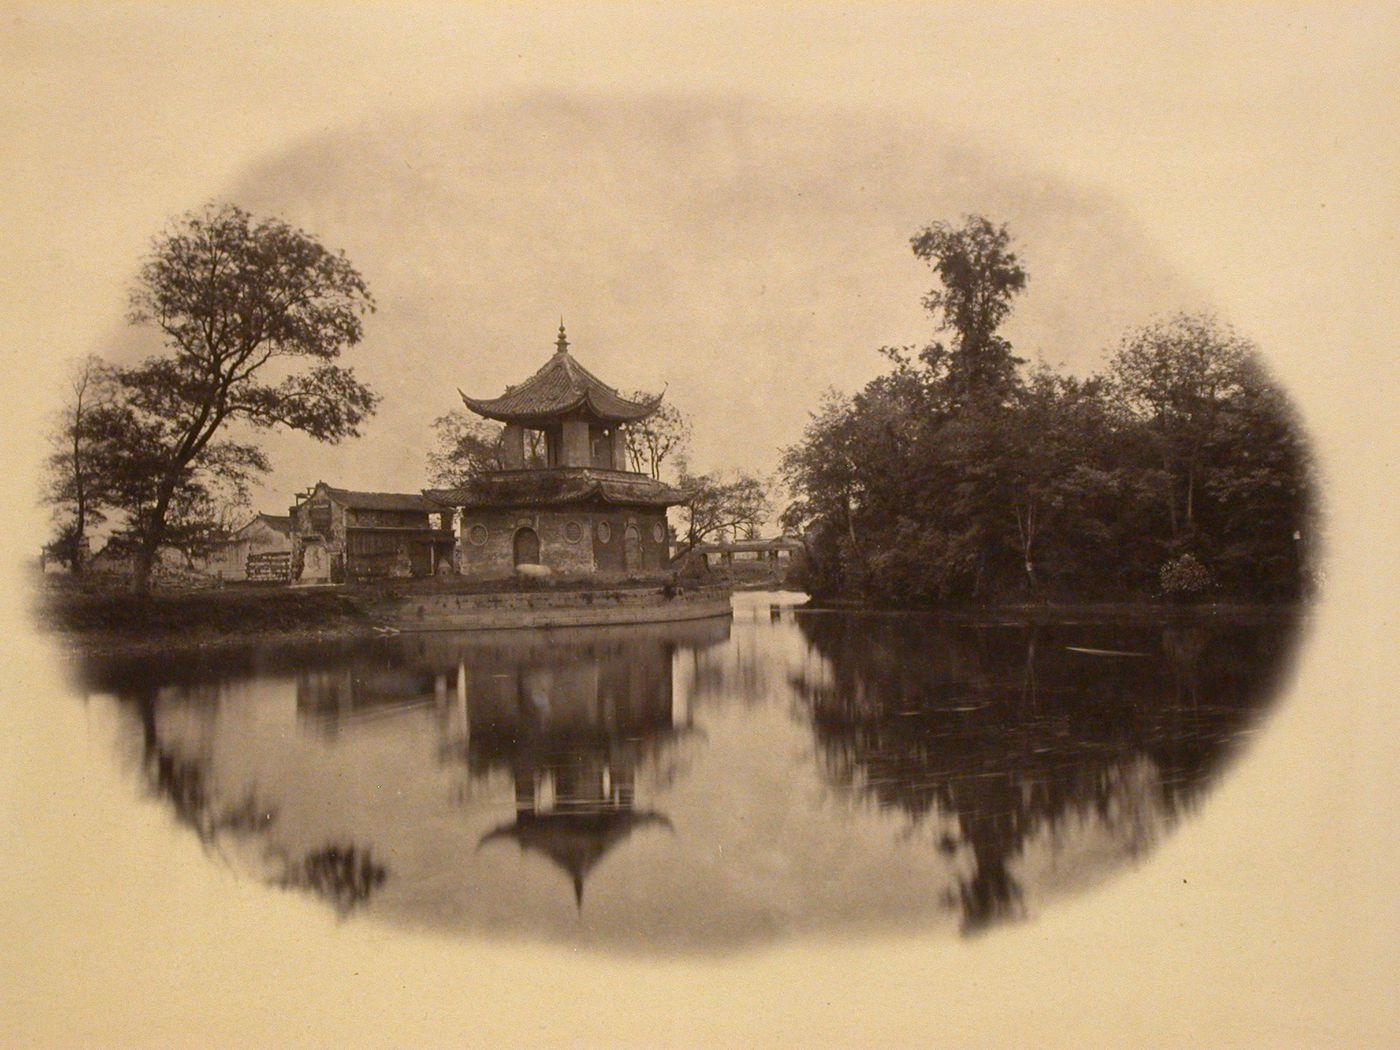 Vignette of pavillion by a pond in the outskirts of Ningpo (now Ningbo Shi), Cheh-kiang Province (now Zhejiang Sheng), China